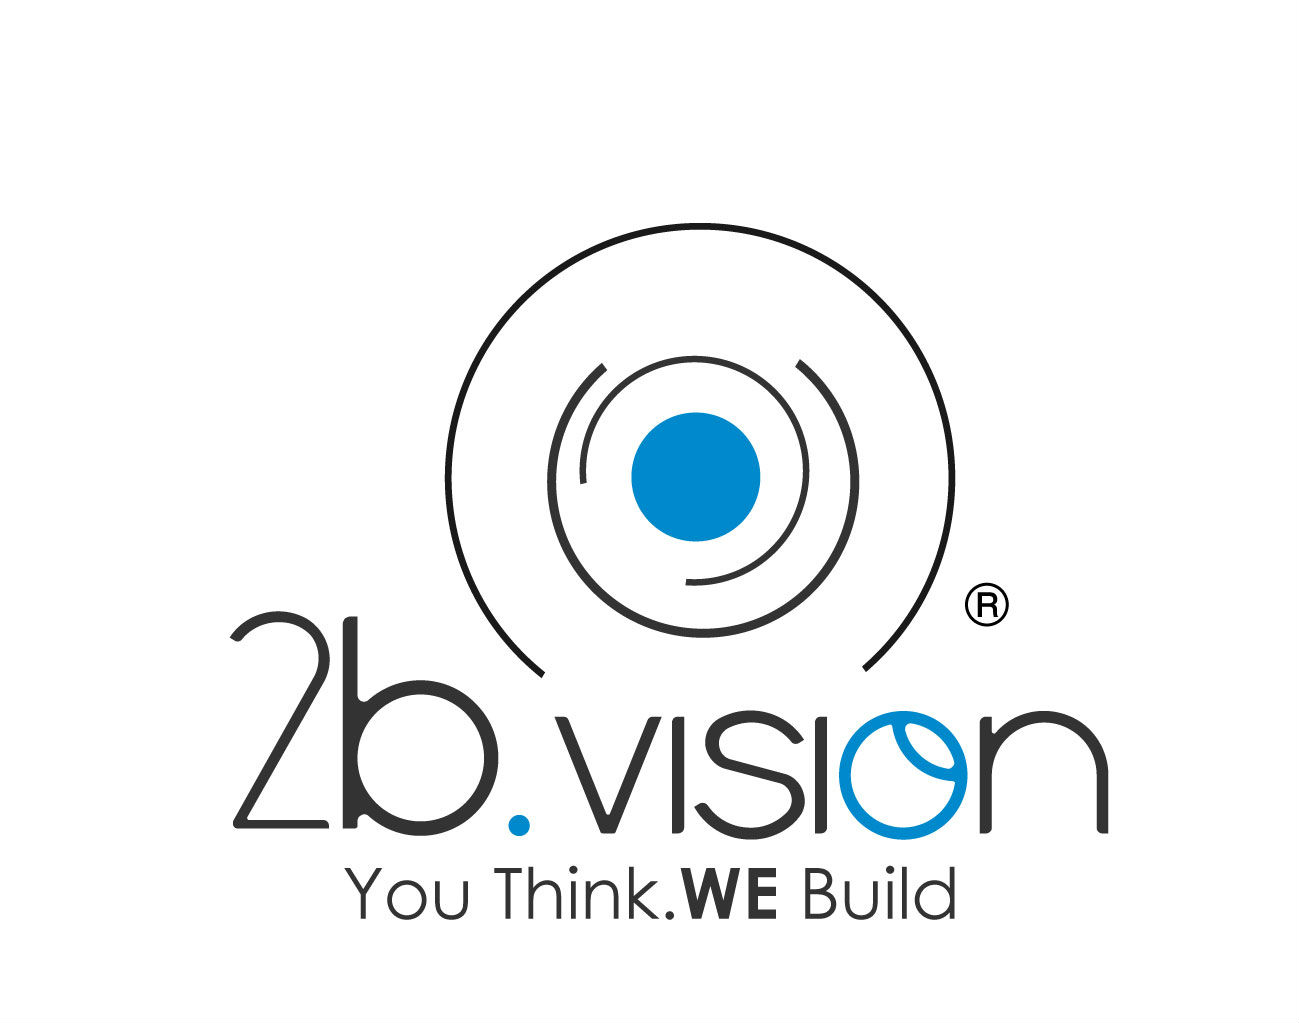 https://www.pakpositions.com/company/2b-vision-technologies